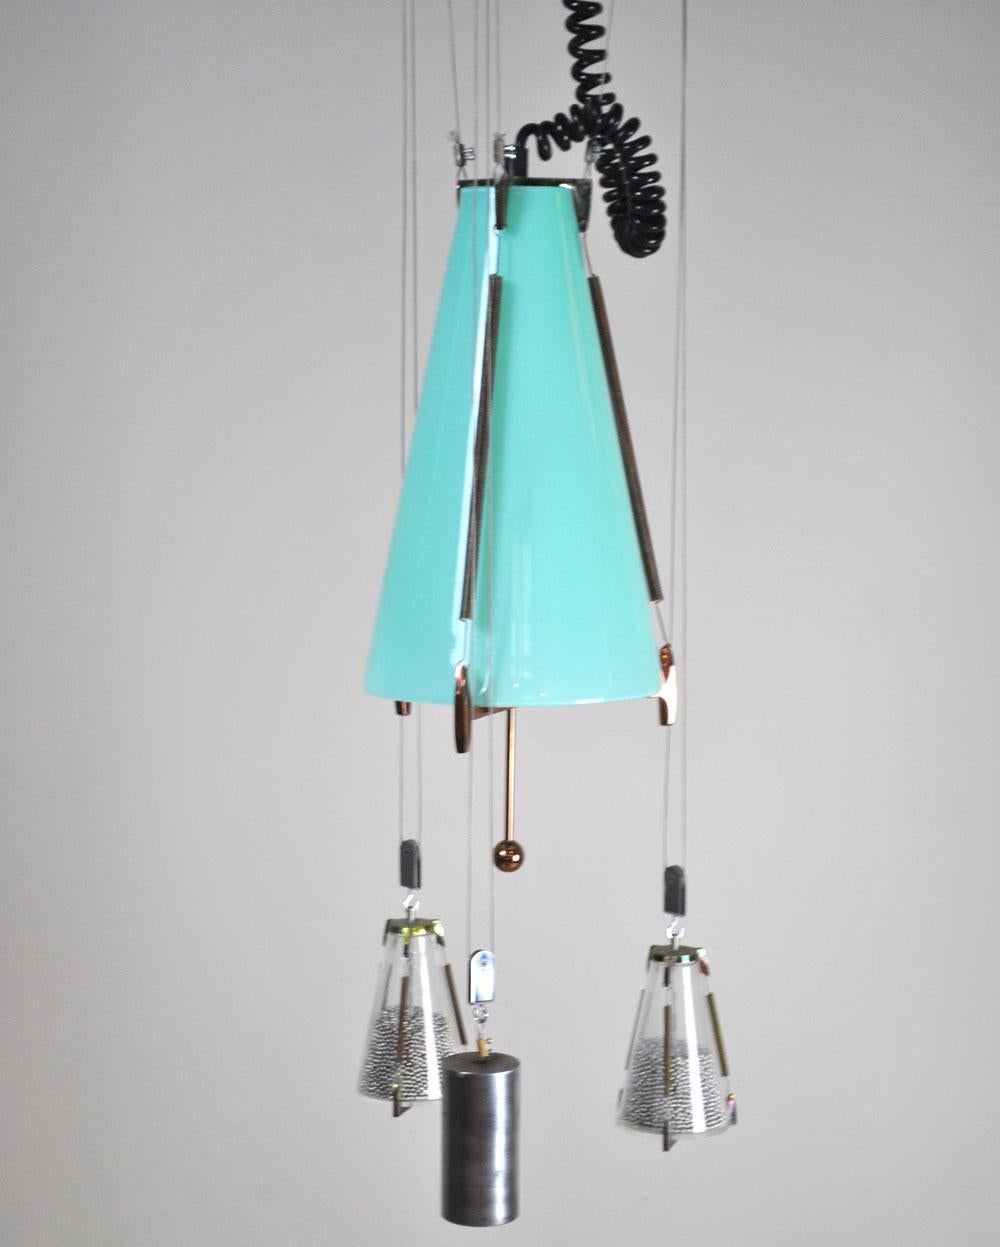 Italian Midcentury Chandelier in the Atomic Style from the 1950s For Sale 1